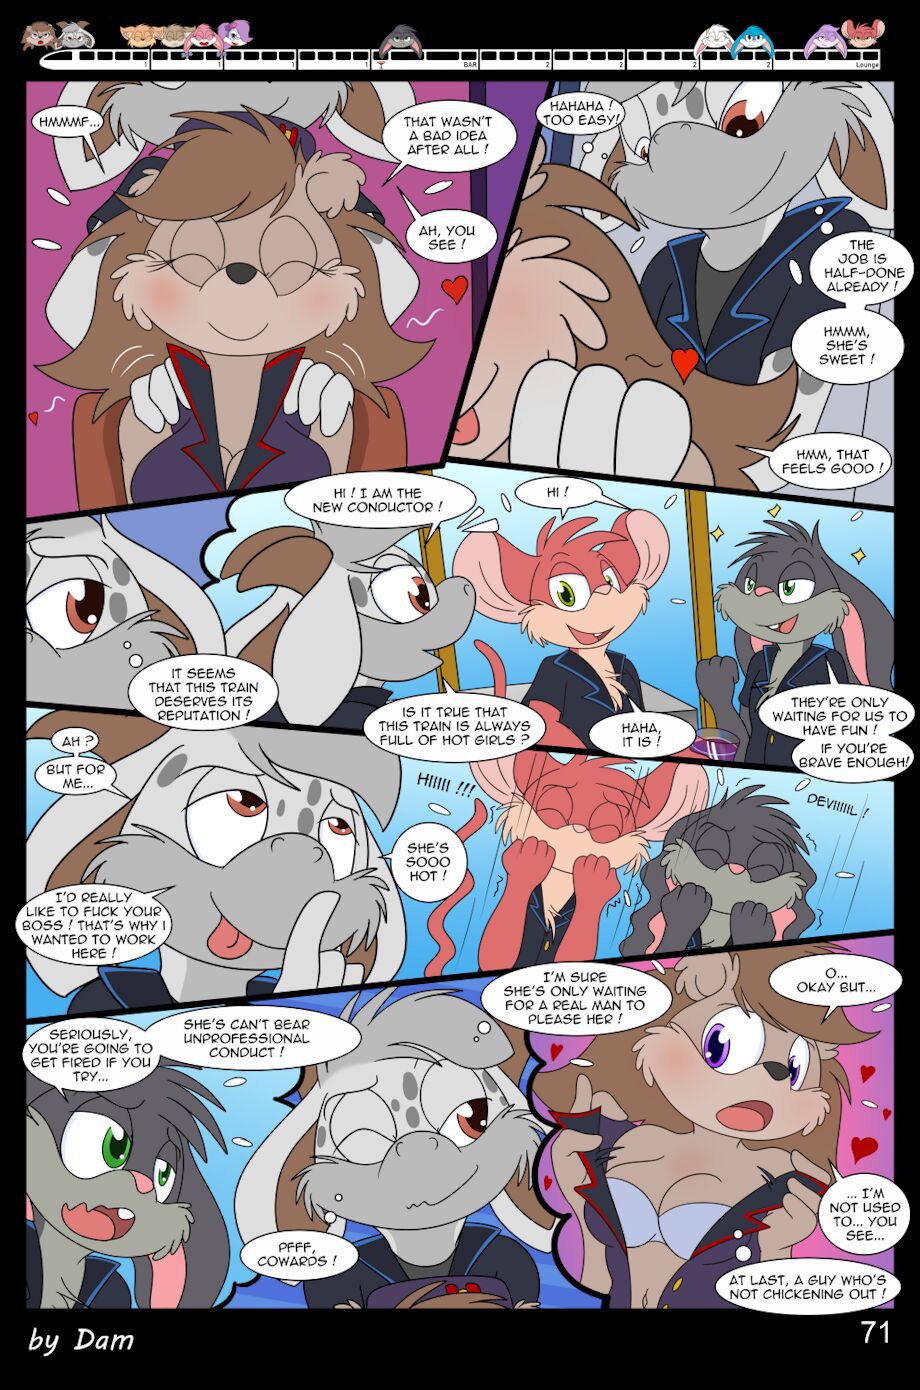 [Dam] Toons on a train [Ongoing] 71